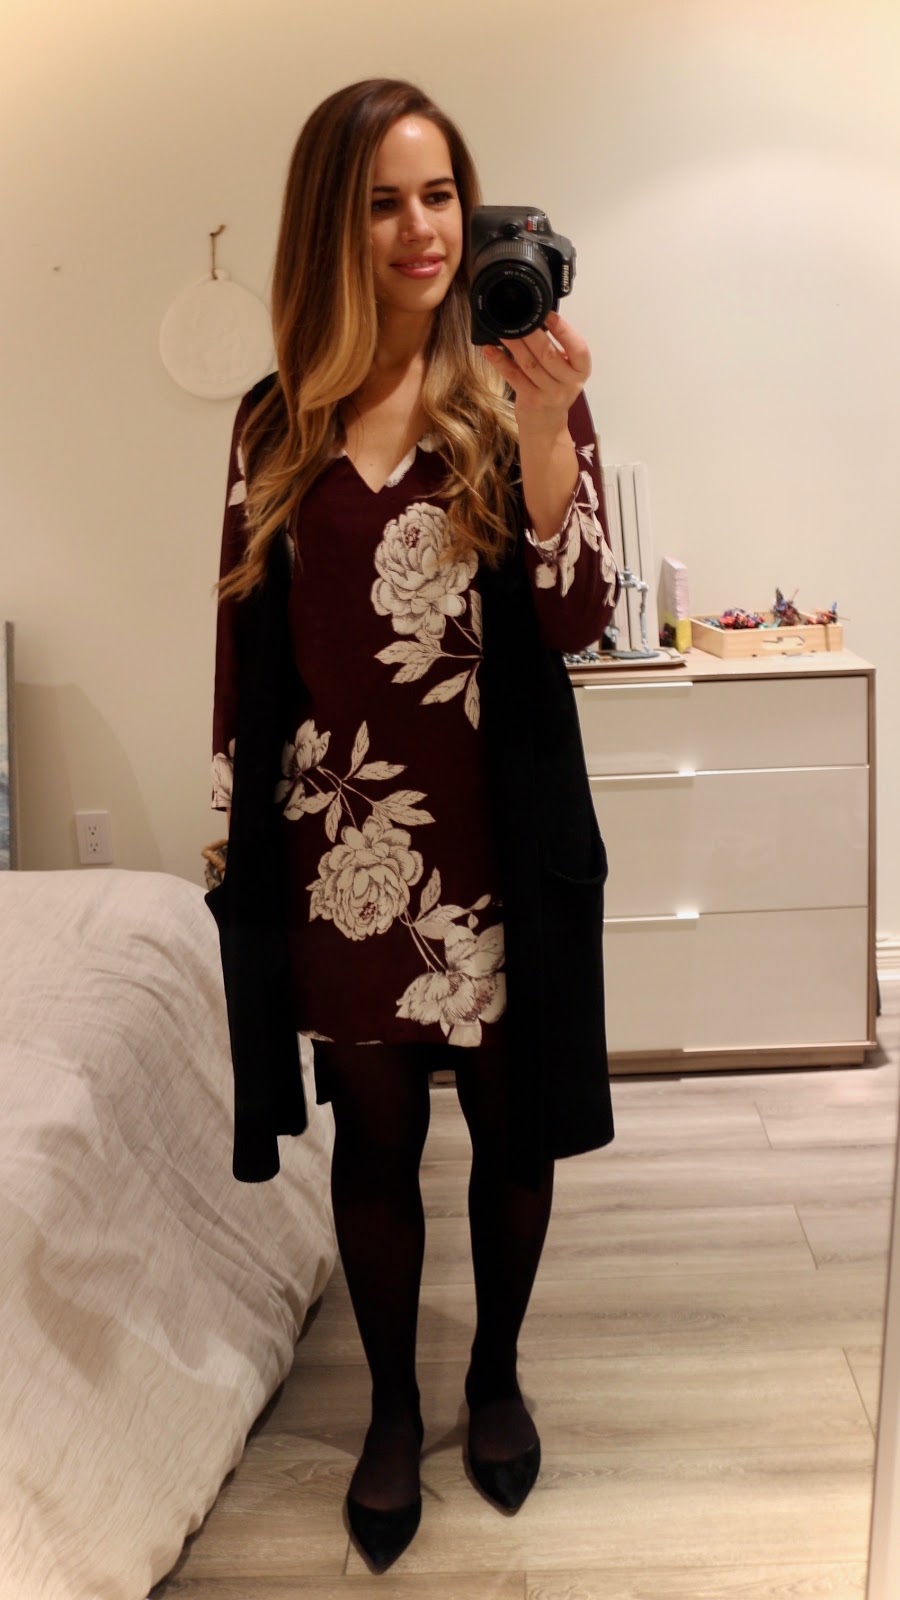 Jules in Flats - Burgundy Floral Shift Dress with Sweater Vest (Business Casual Fall Workwear on a Budget) 